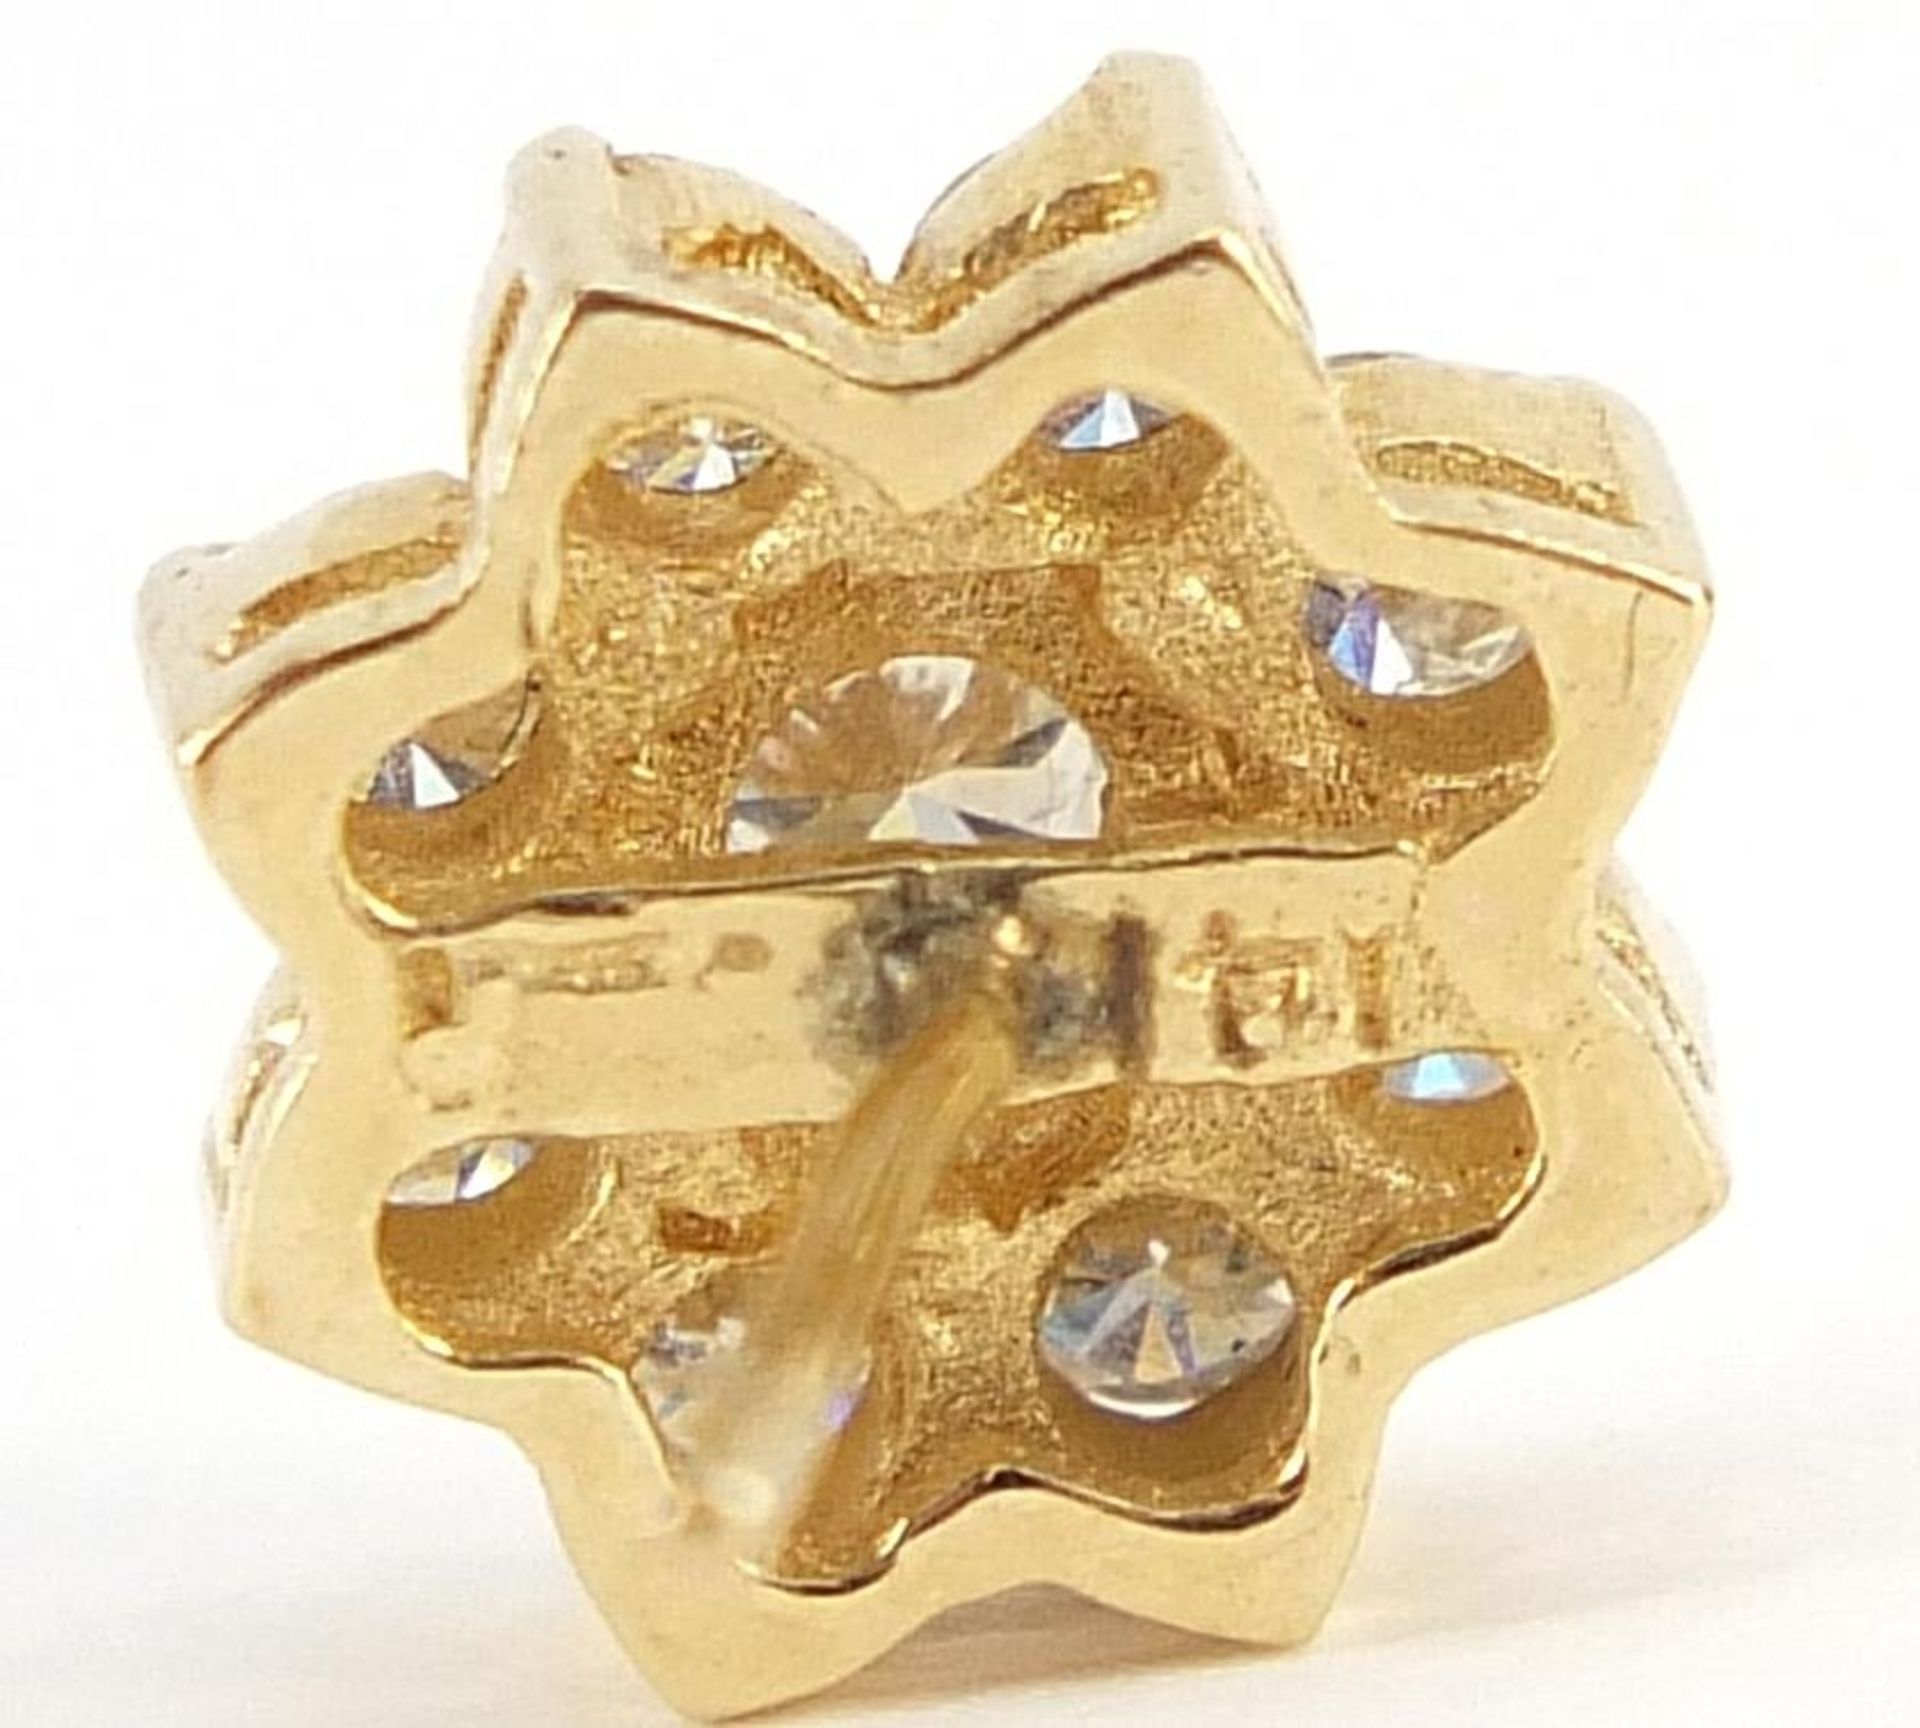 14ct gold diamond flower head stud earrings, the largest diamond approximately 3.7mm in diameter, - Image 3 of 3